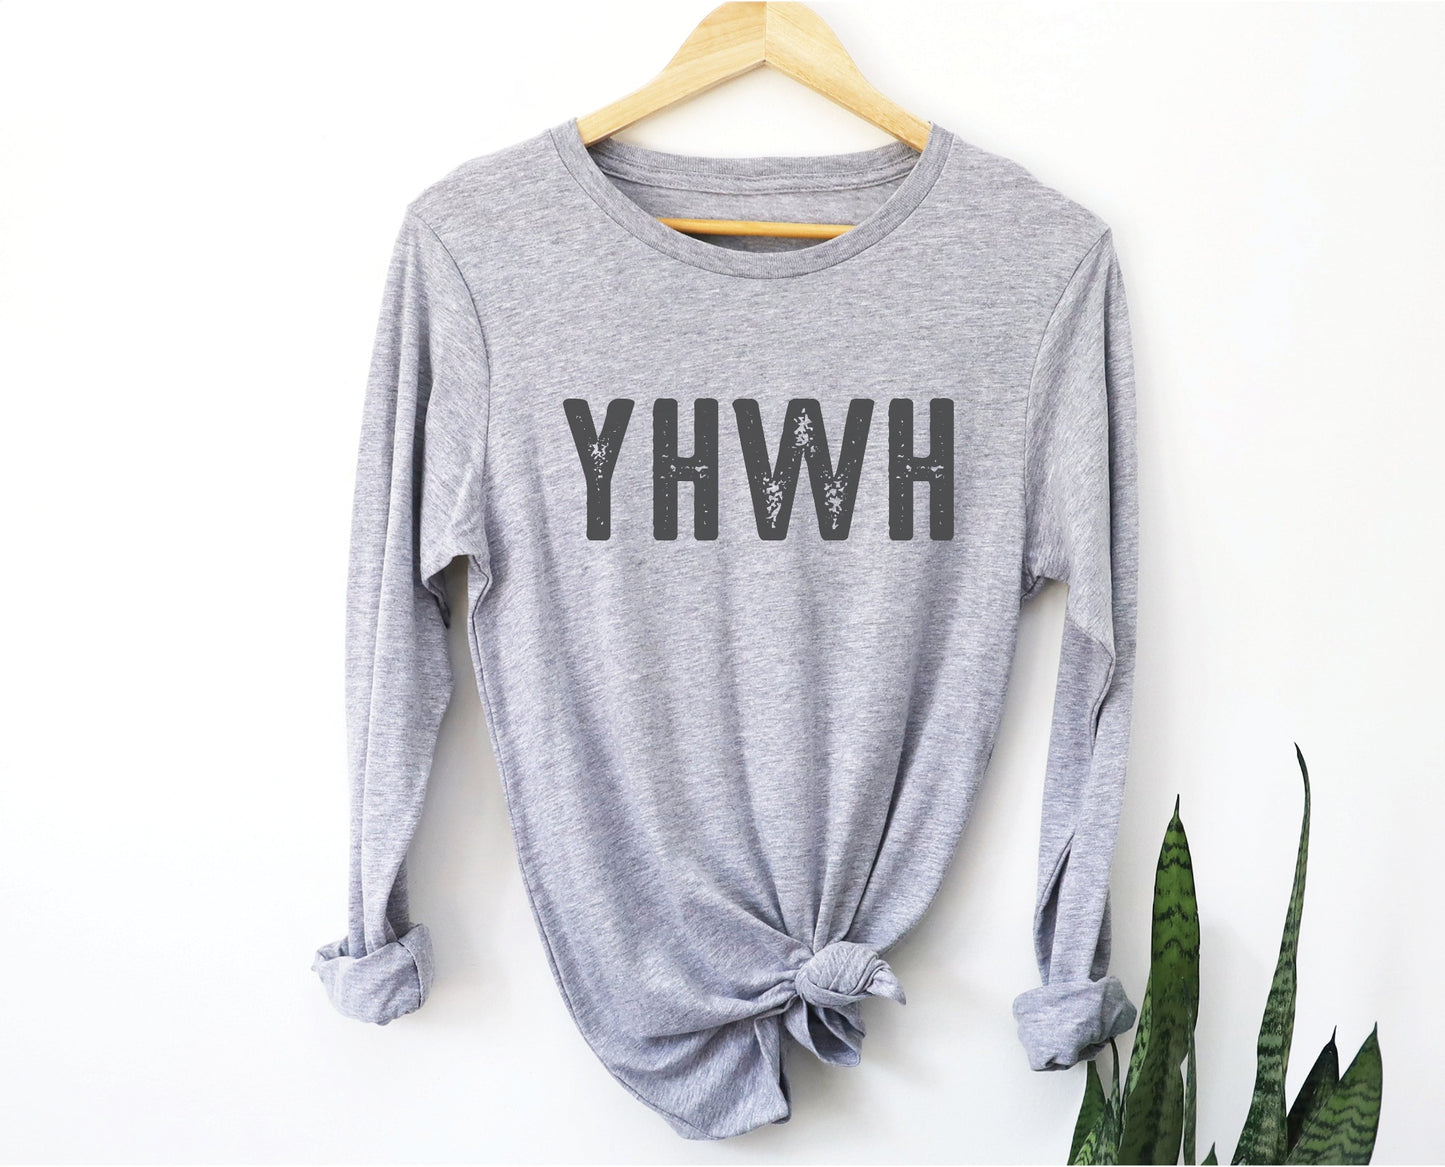 YHWH Hebrew Biblical Name of God Yahweh Christian aesthetic design printed in charcoal on soft heather gray long sleeve tee for men and women